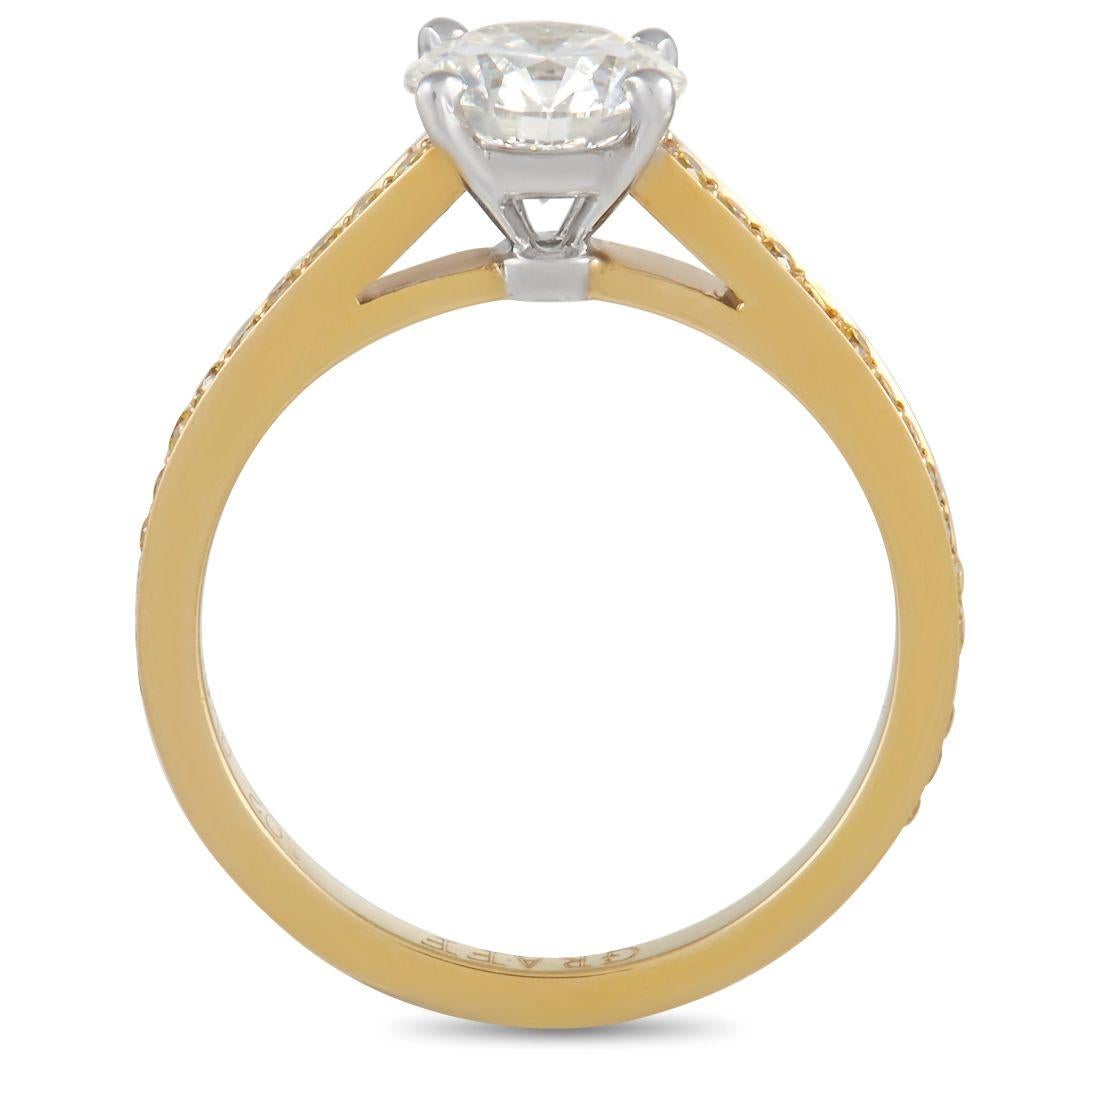 There’s something stunning about this impeccable ring from Graff. This luxury piece features a 2mm wide band crafted from 18K Yellow Gold, which comes to life thanks to inset yellow diamonds with a total weight of 0.25 carats. At the center,